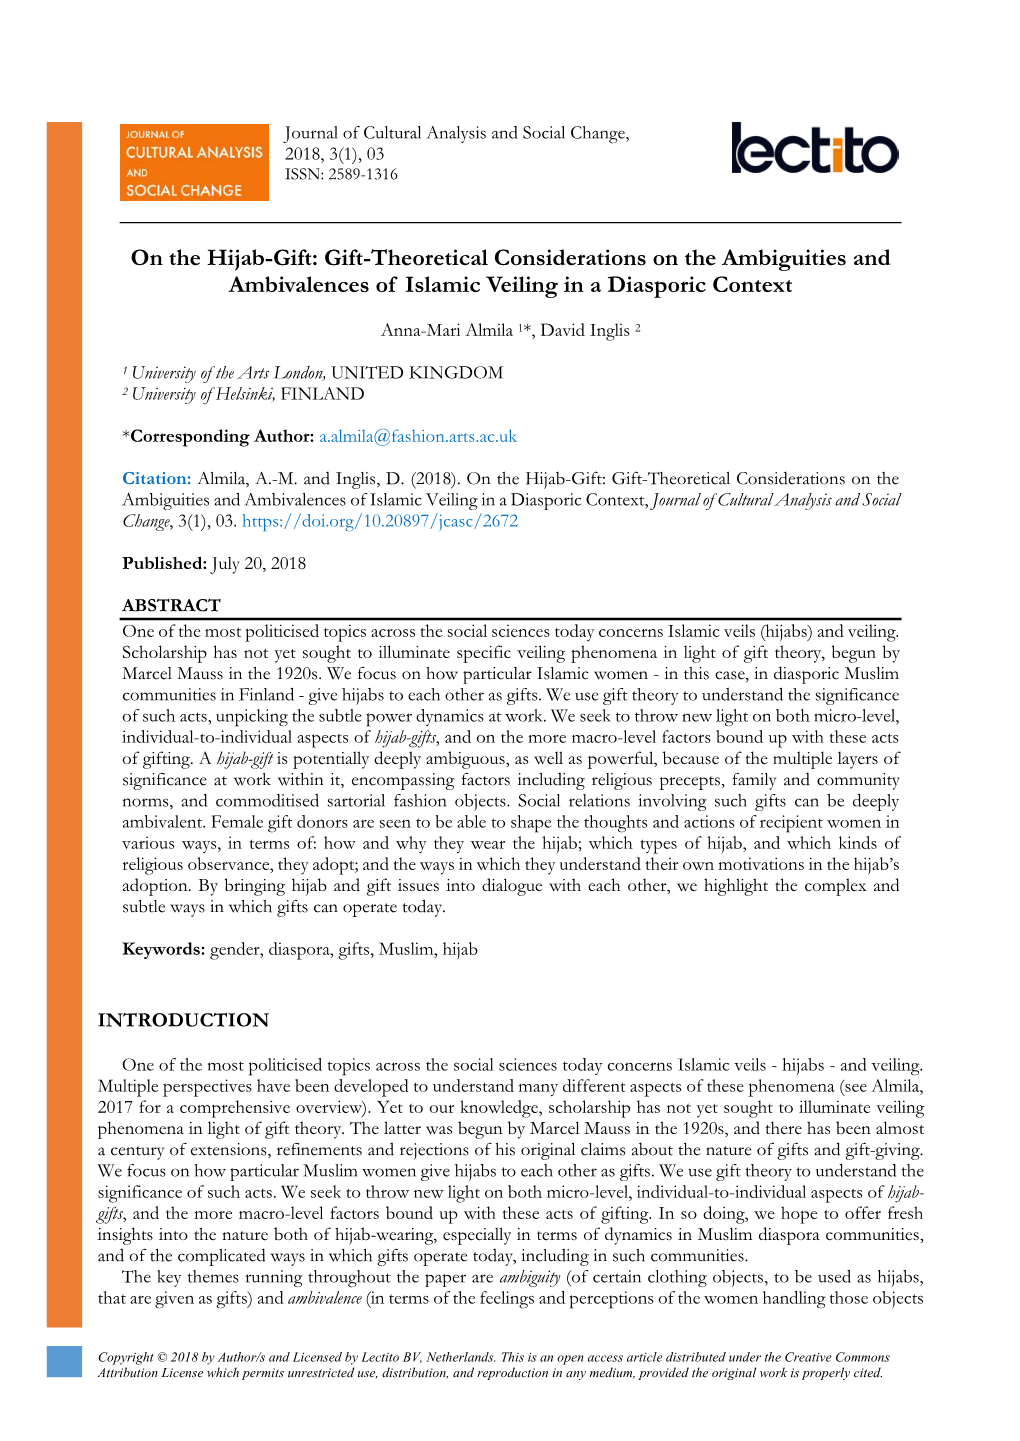 Gift-Theoretical Considerations on the Ambiguities and Ambivalences of Islamic Veiling in a Diasporic Context